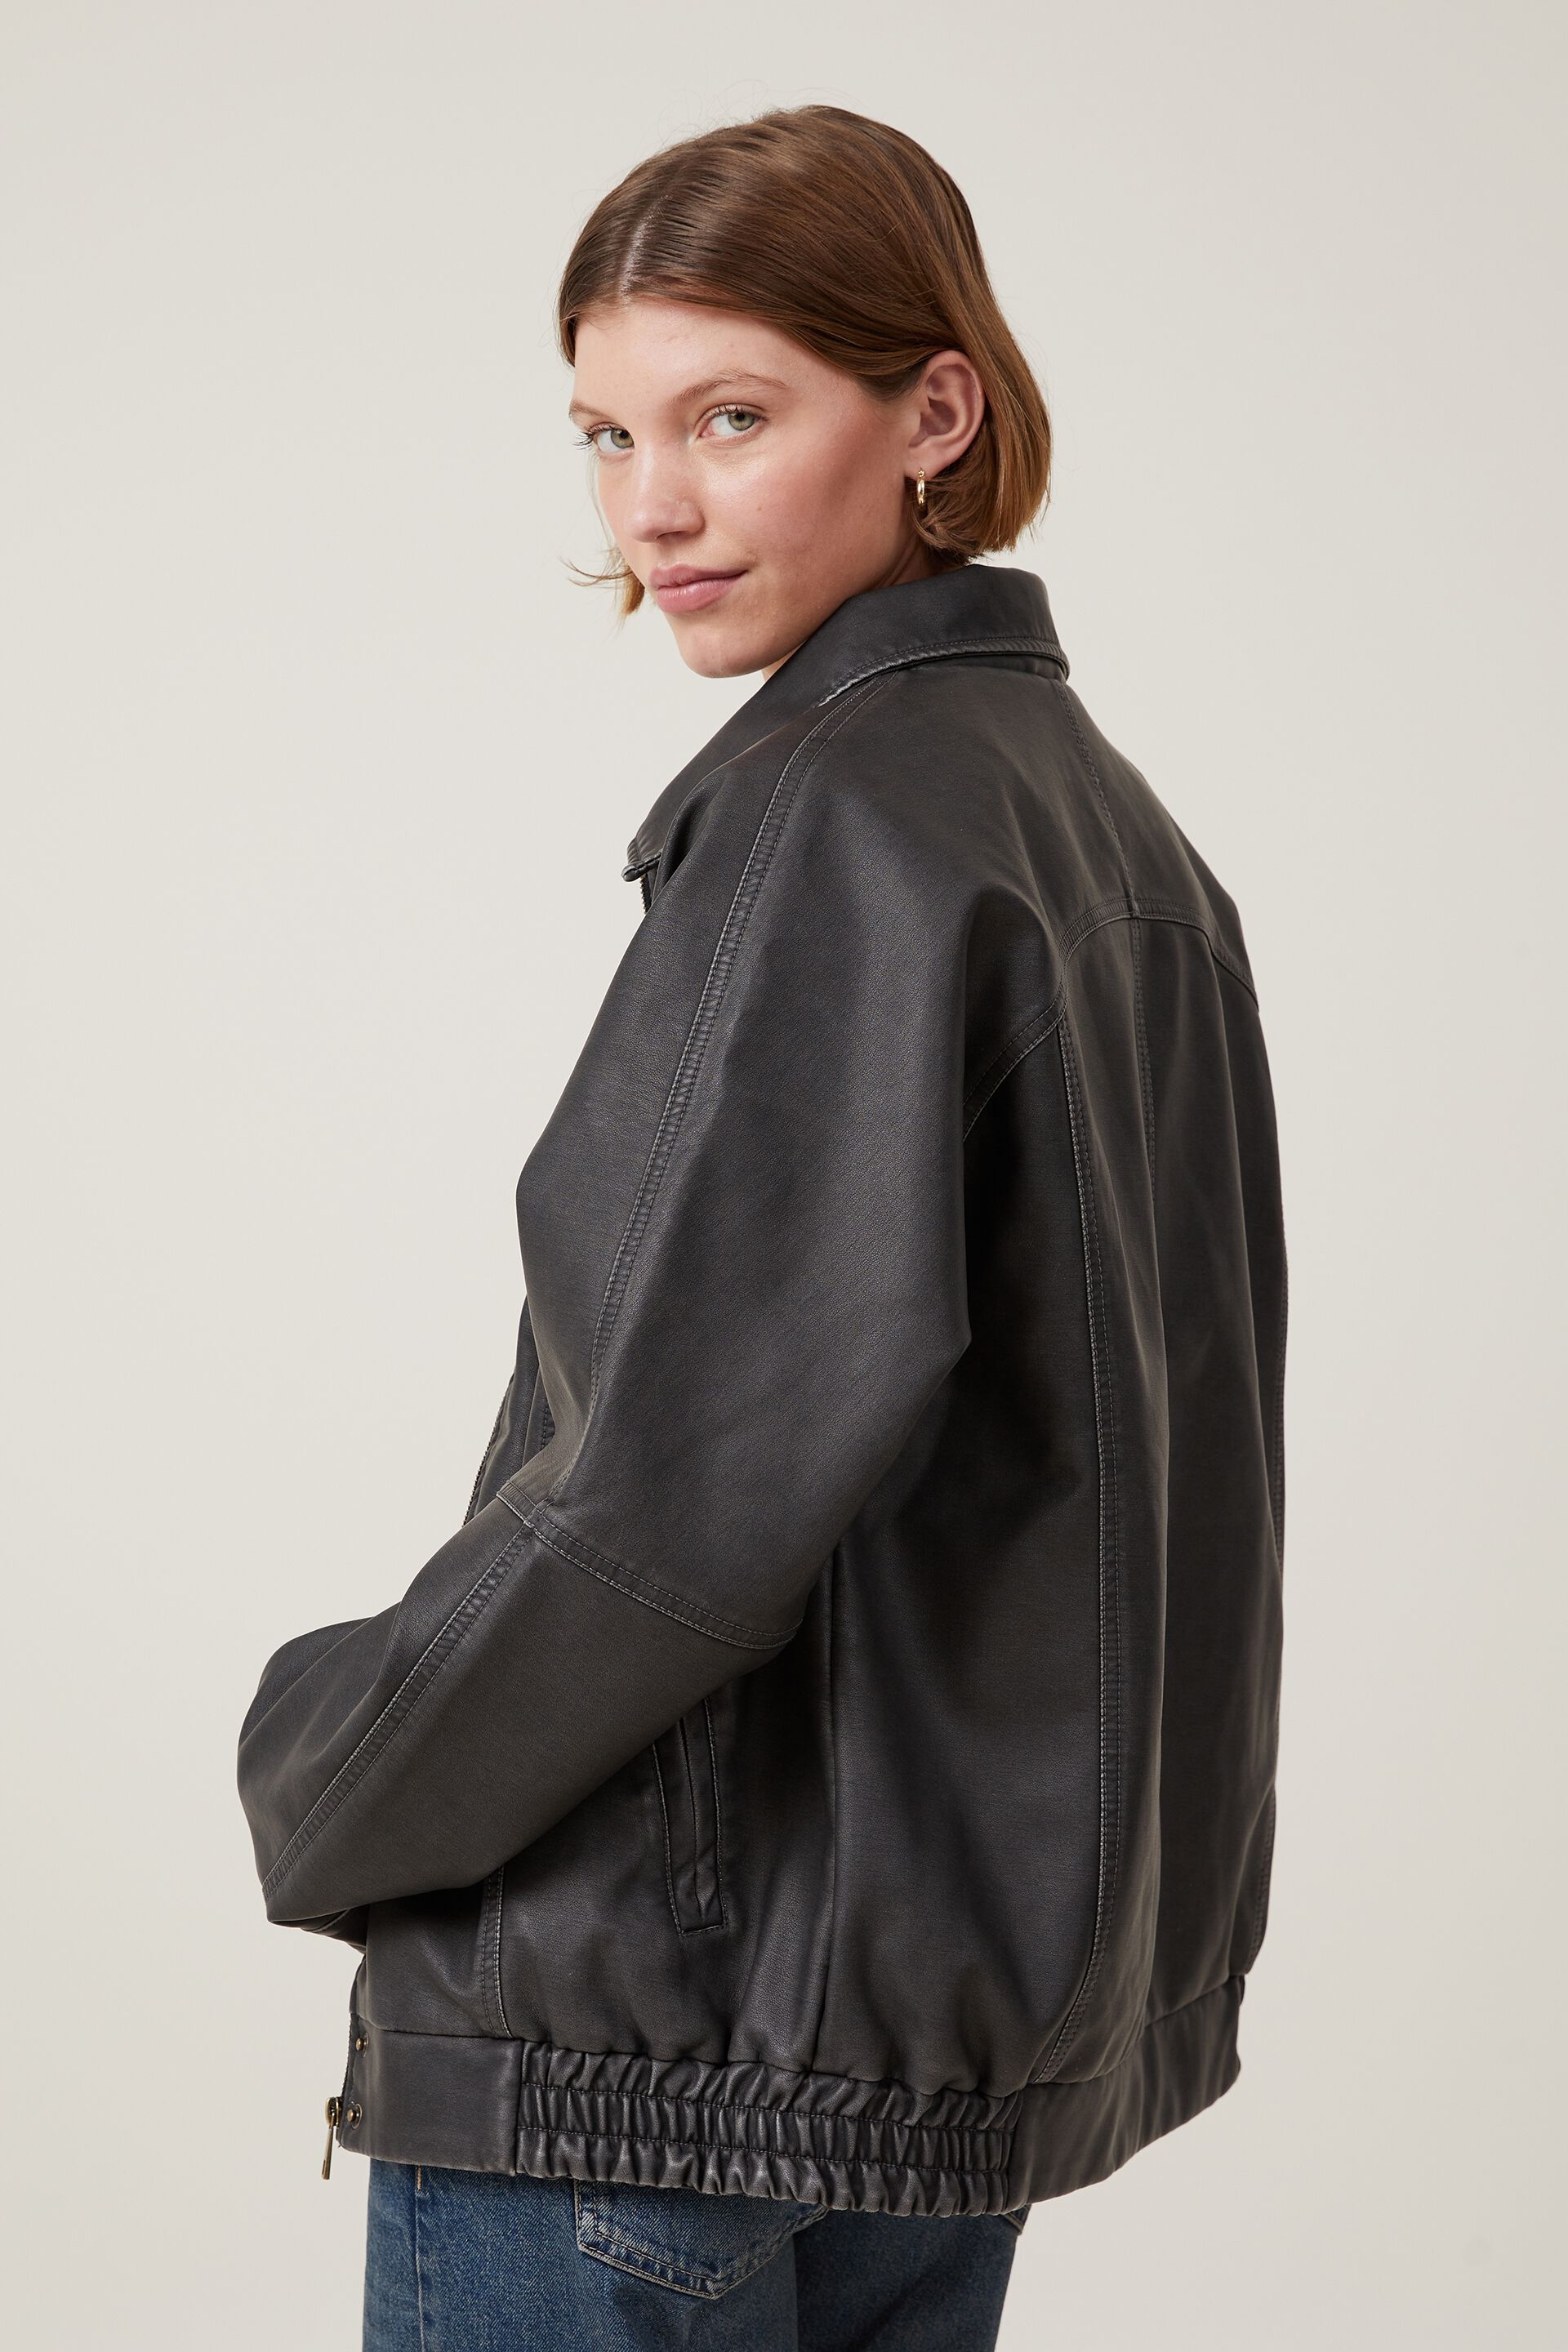 Faux Leather Jackets Are Really Cool Photos | GQ